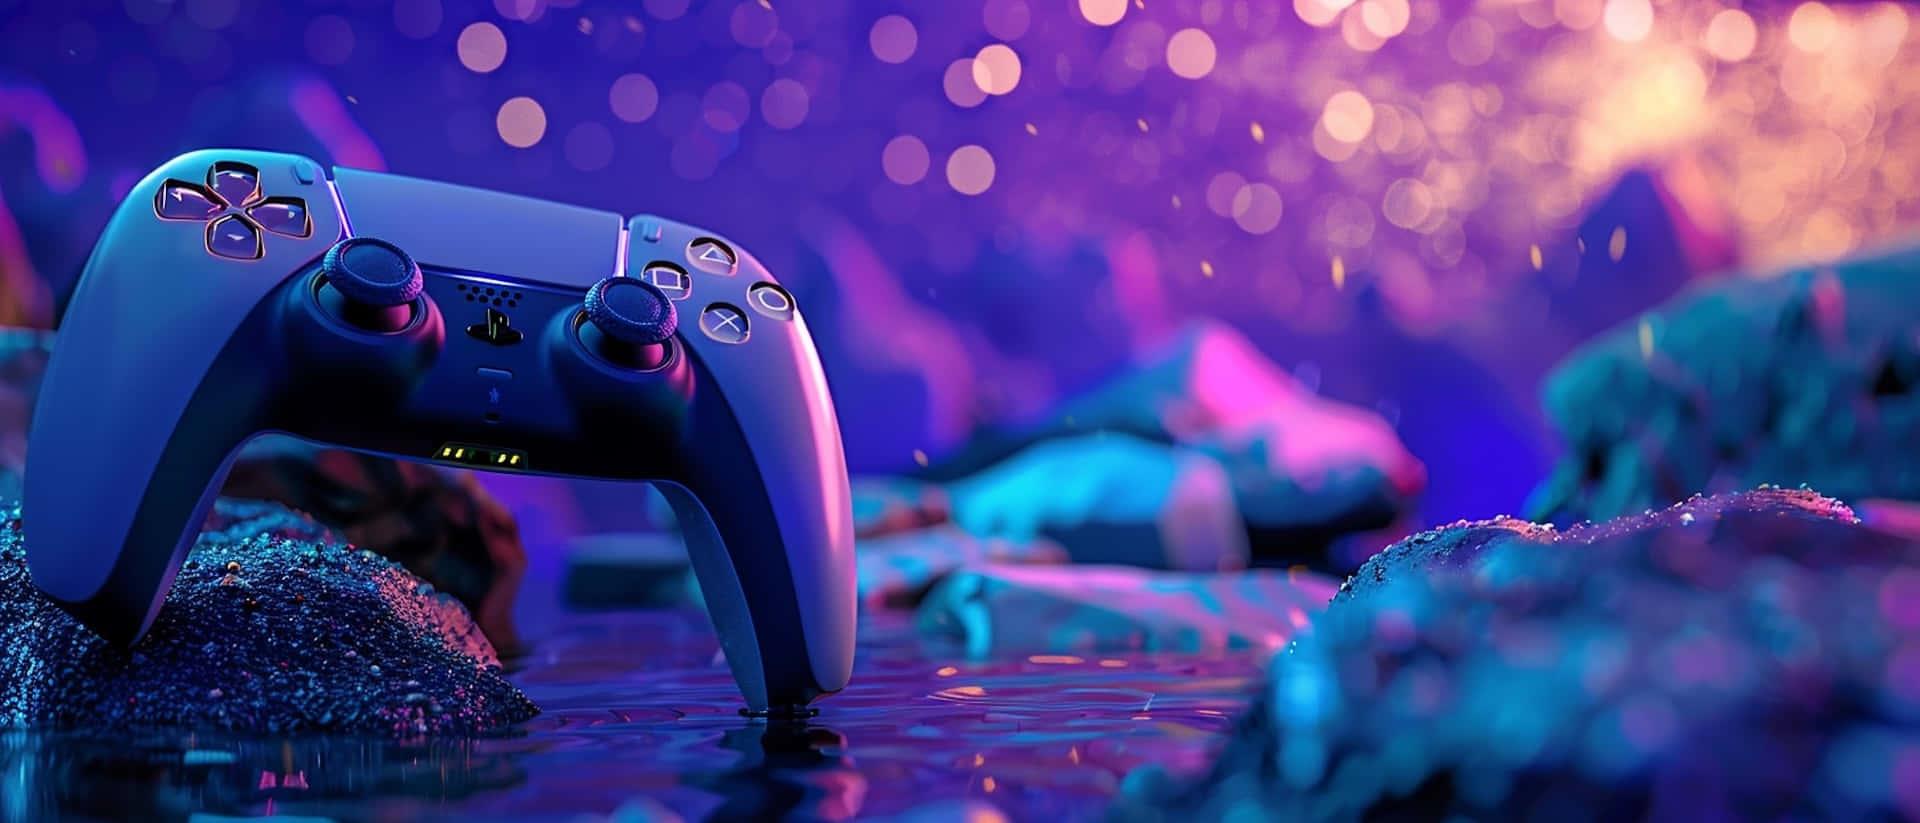 P S5 Controller Nighttime Gaming Session Wallpaper